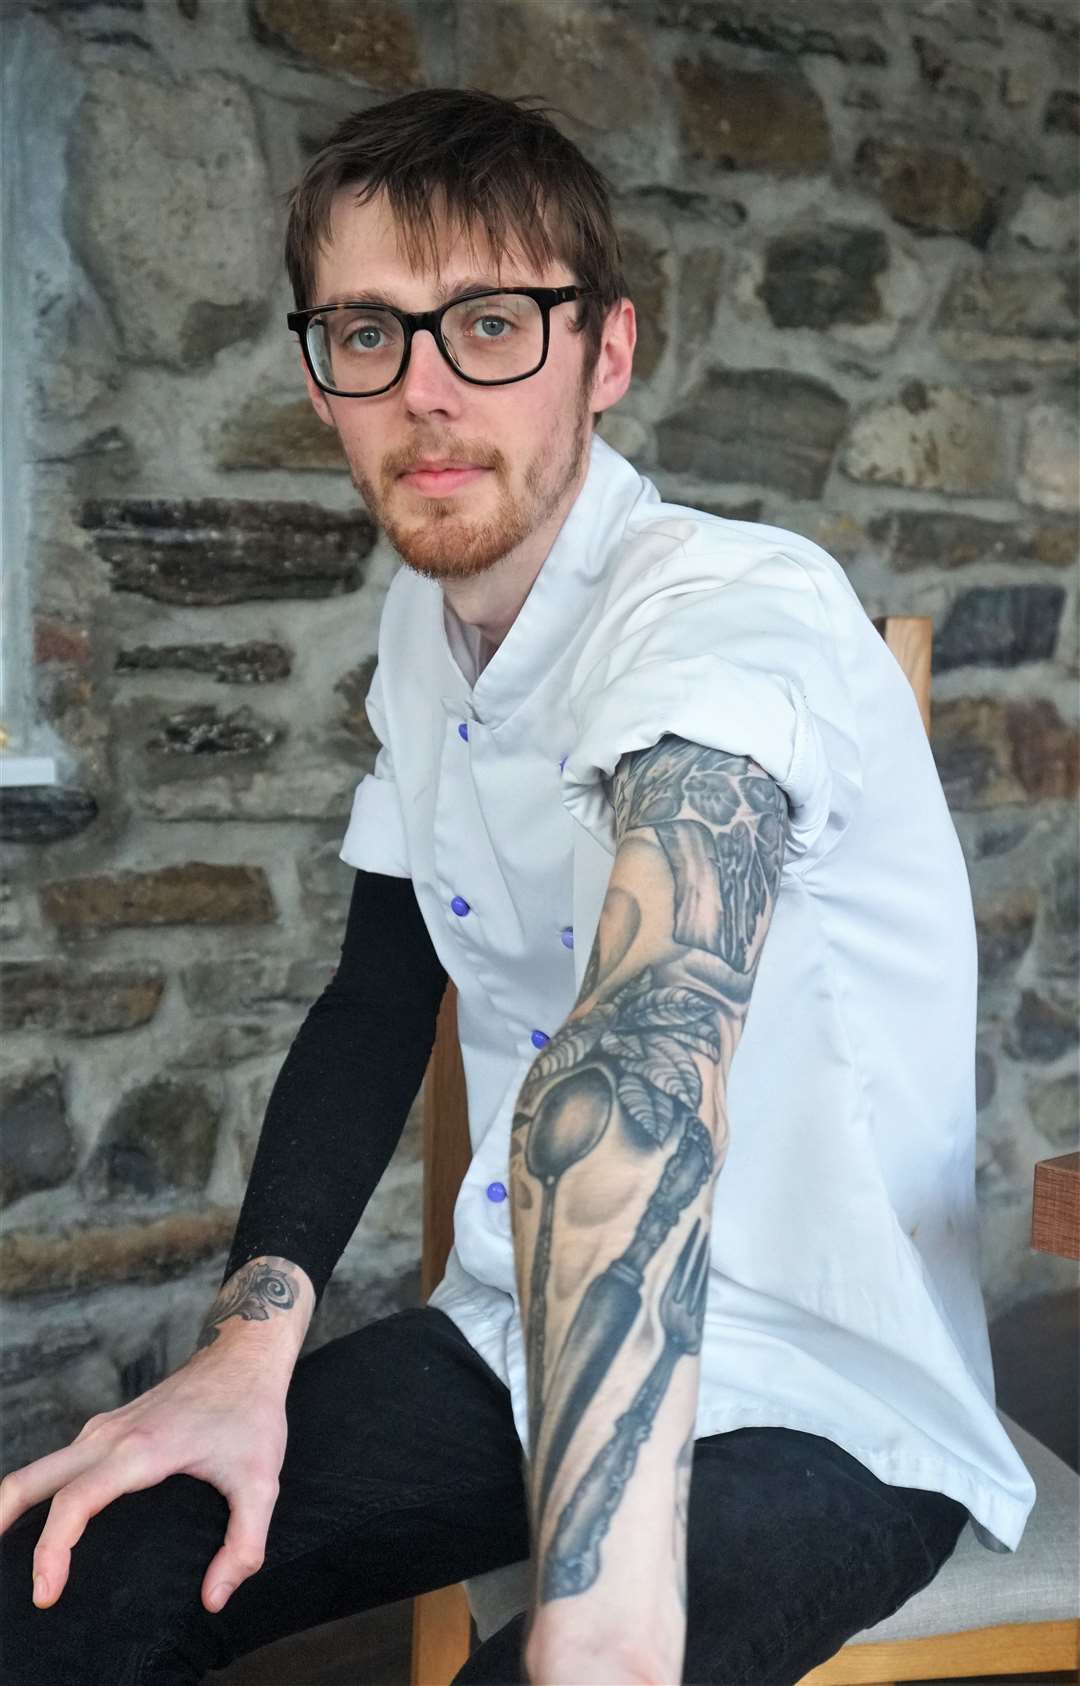 Puldagon chef Josh Tanswell wears his heart on his sleeve with tattoos showing dining utensils. Josh once worked with celebrity chef Heston Blumenthal in London. Picture: DGS